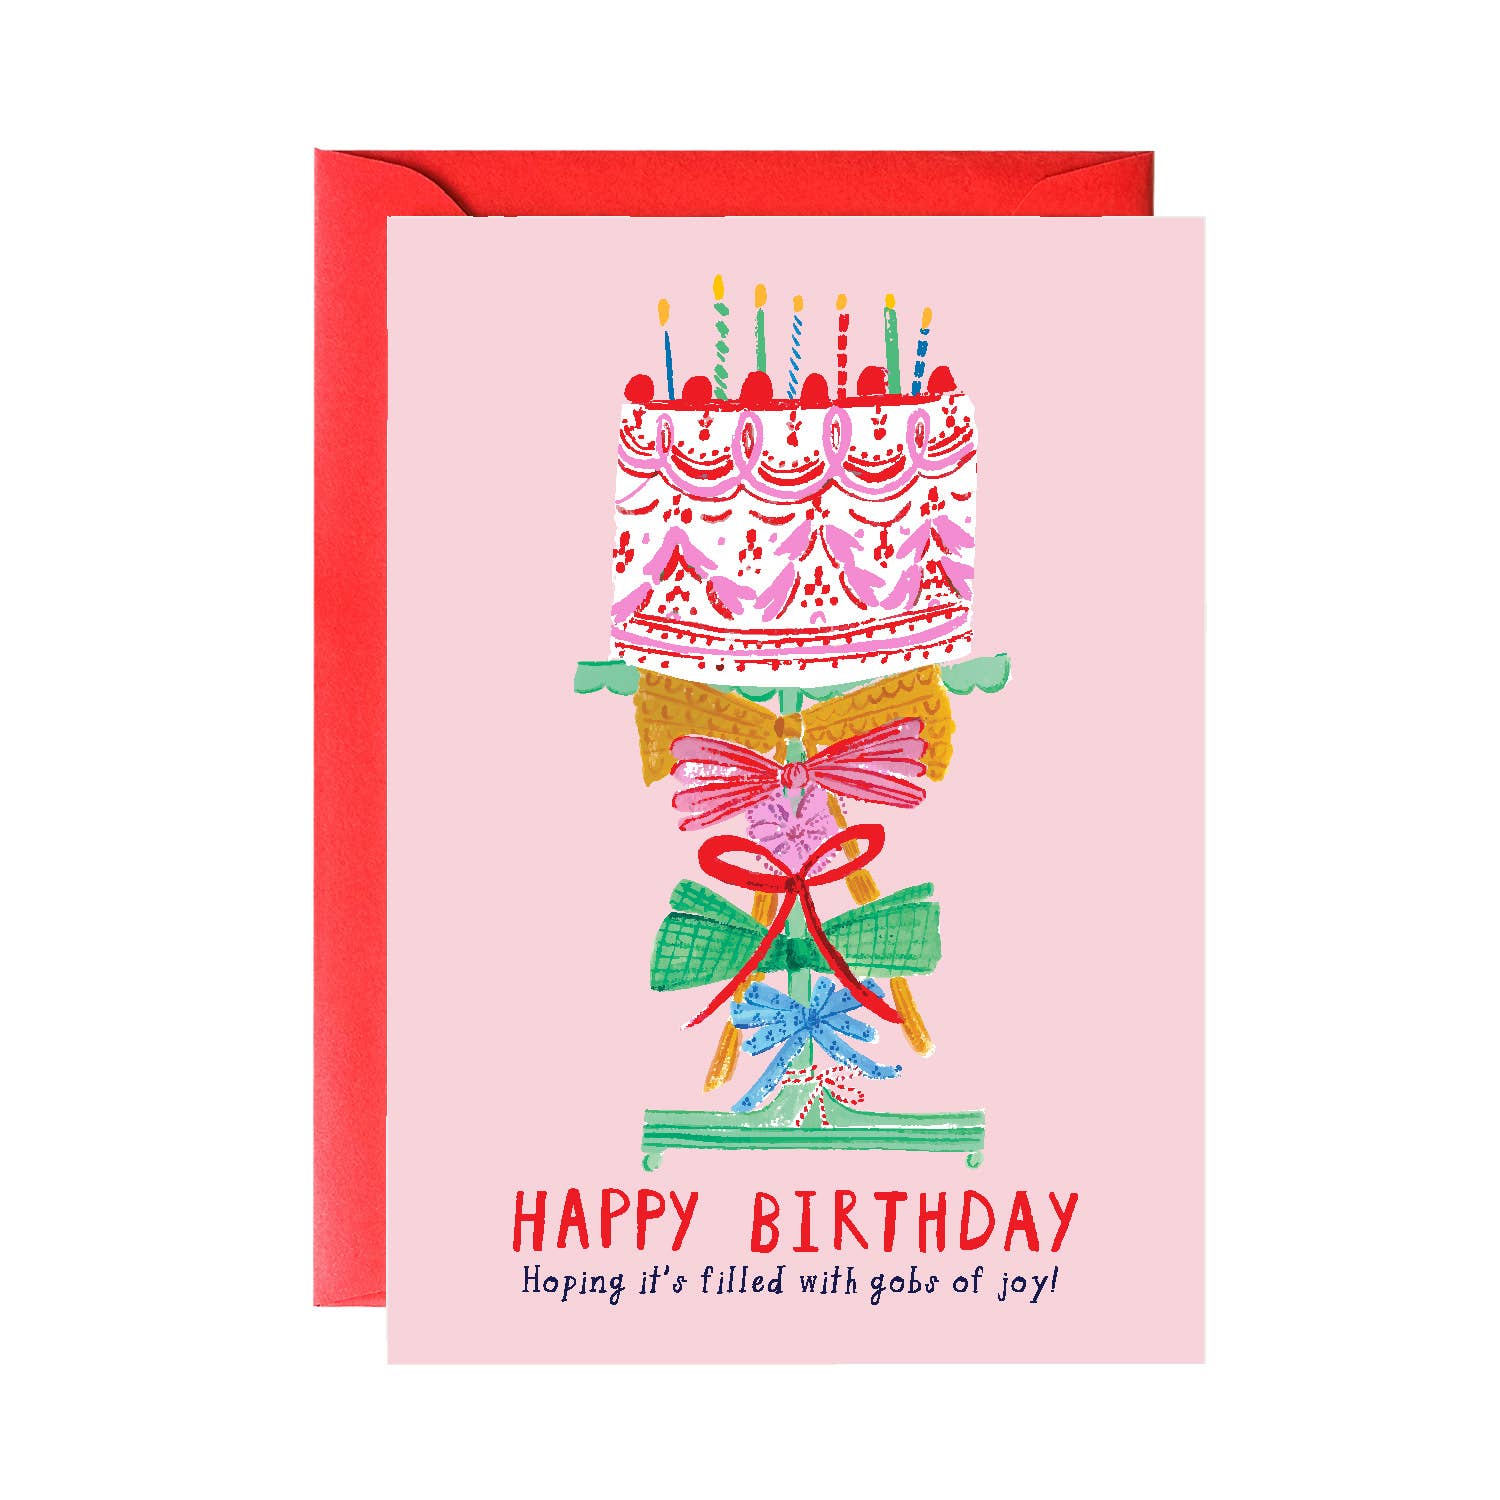 Ribbons on the Cake Greeting Card